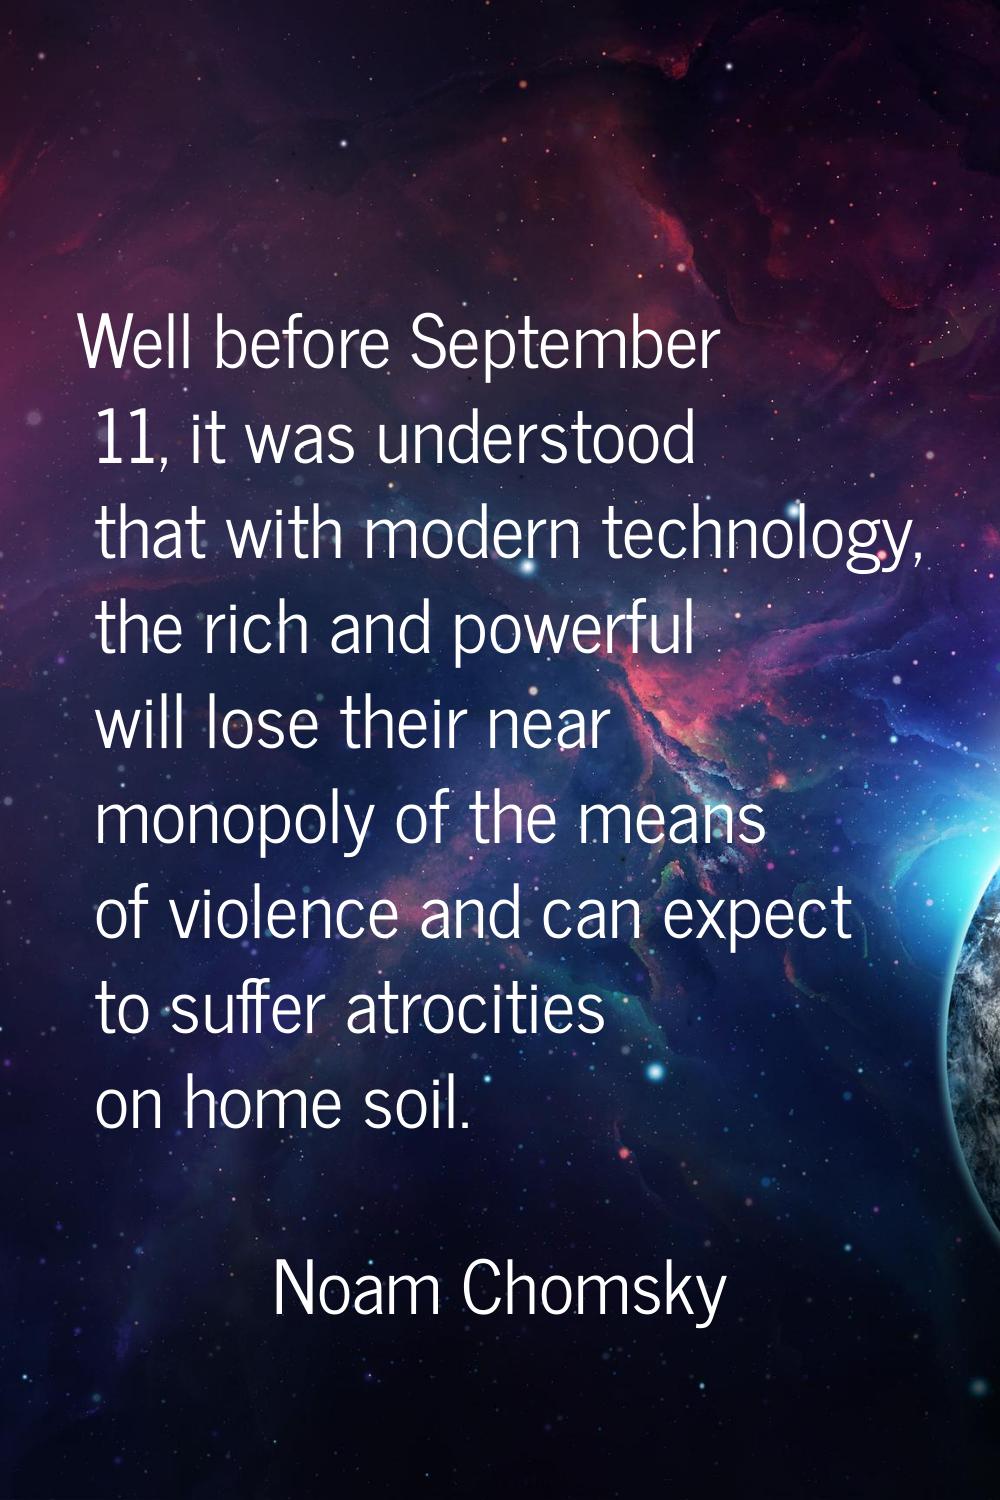 Well before September 11, it was understood that with modern technology, the rich and powerful will